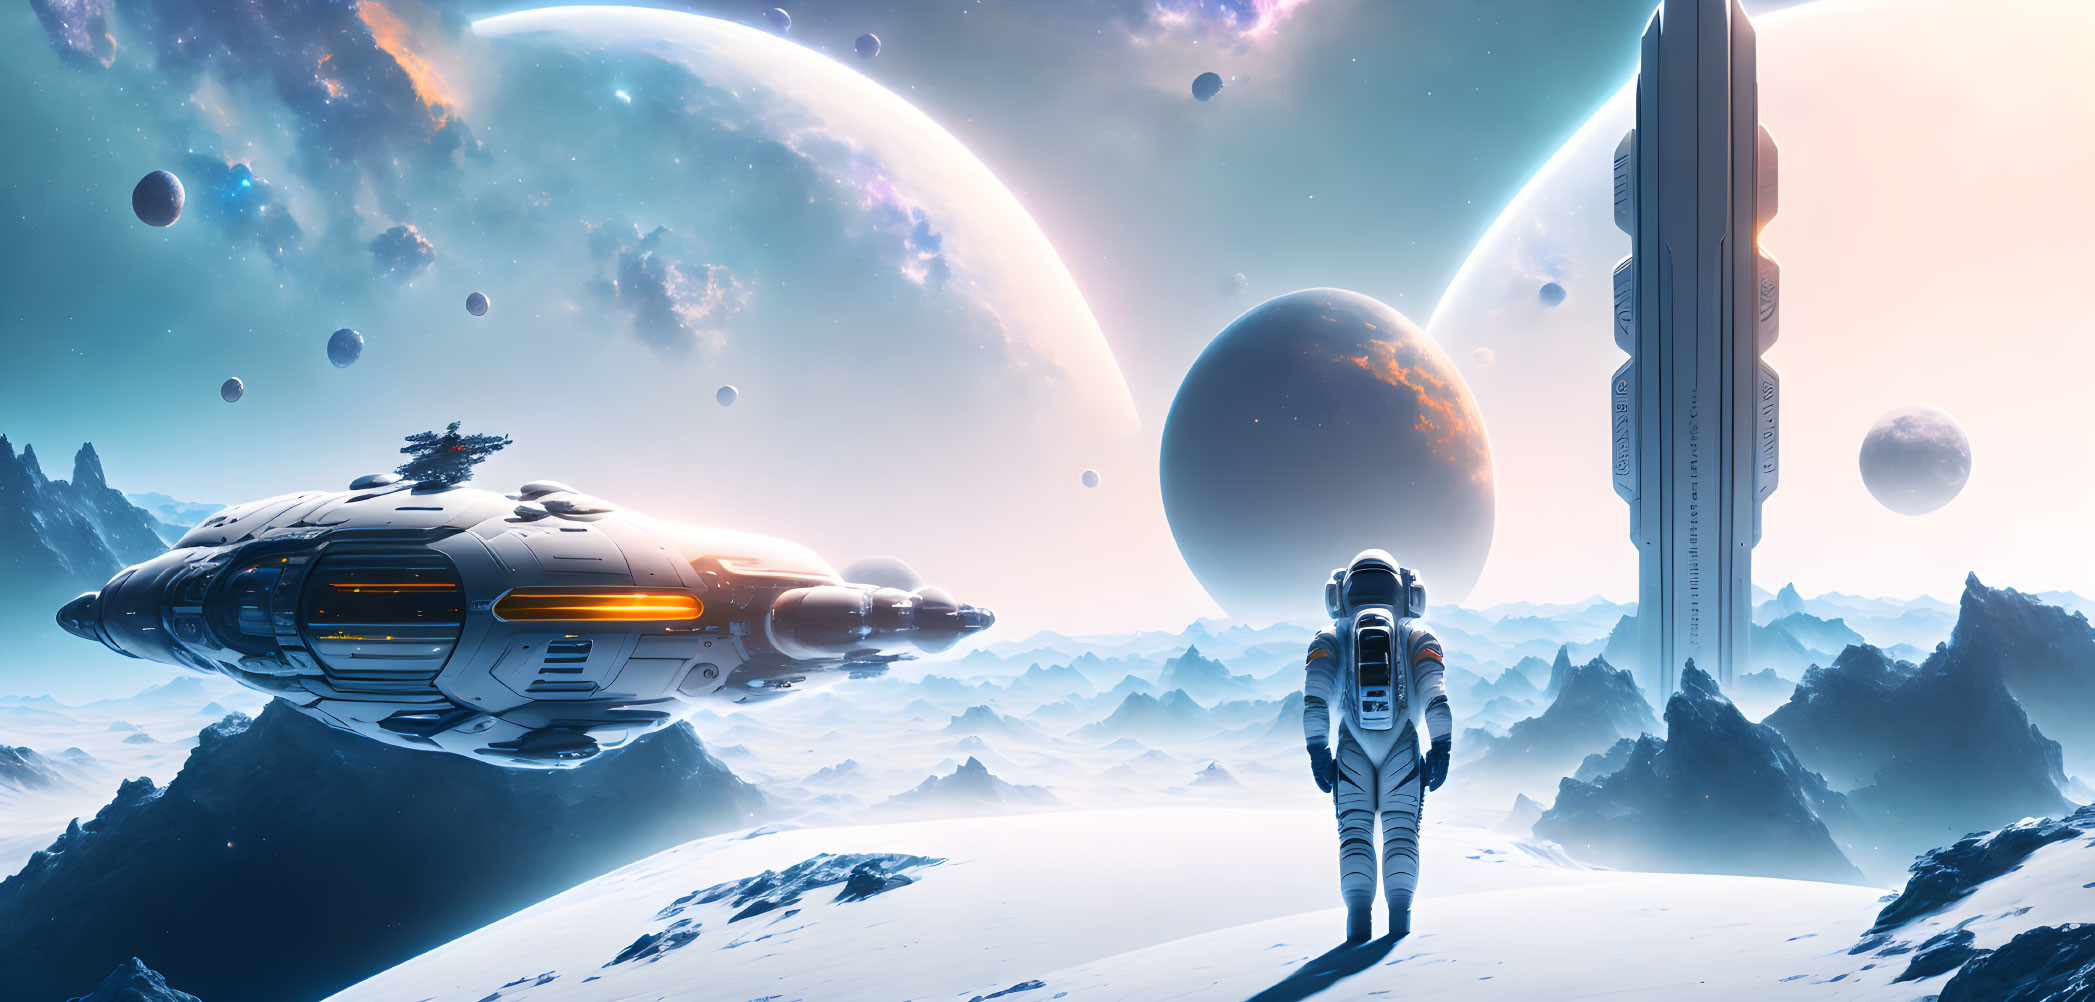 Astronaut on snowy alien planet with spaceships and celestial bodies